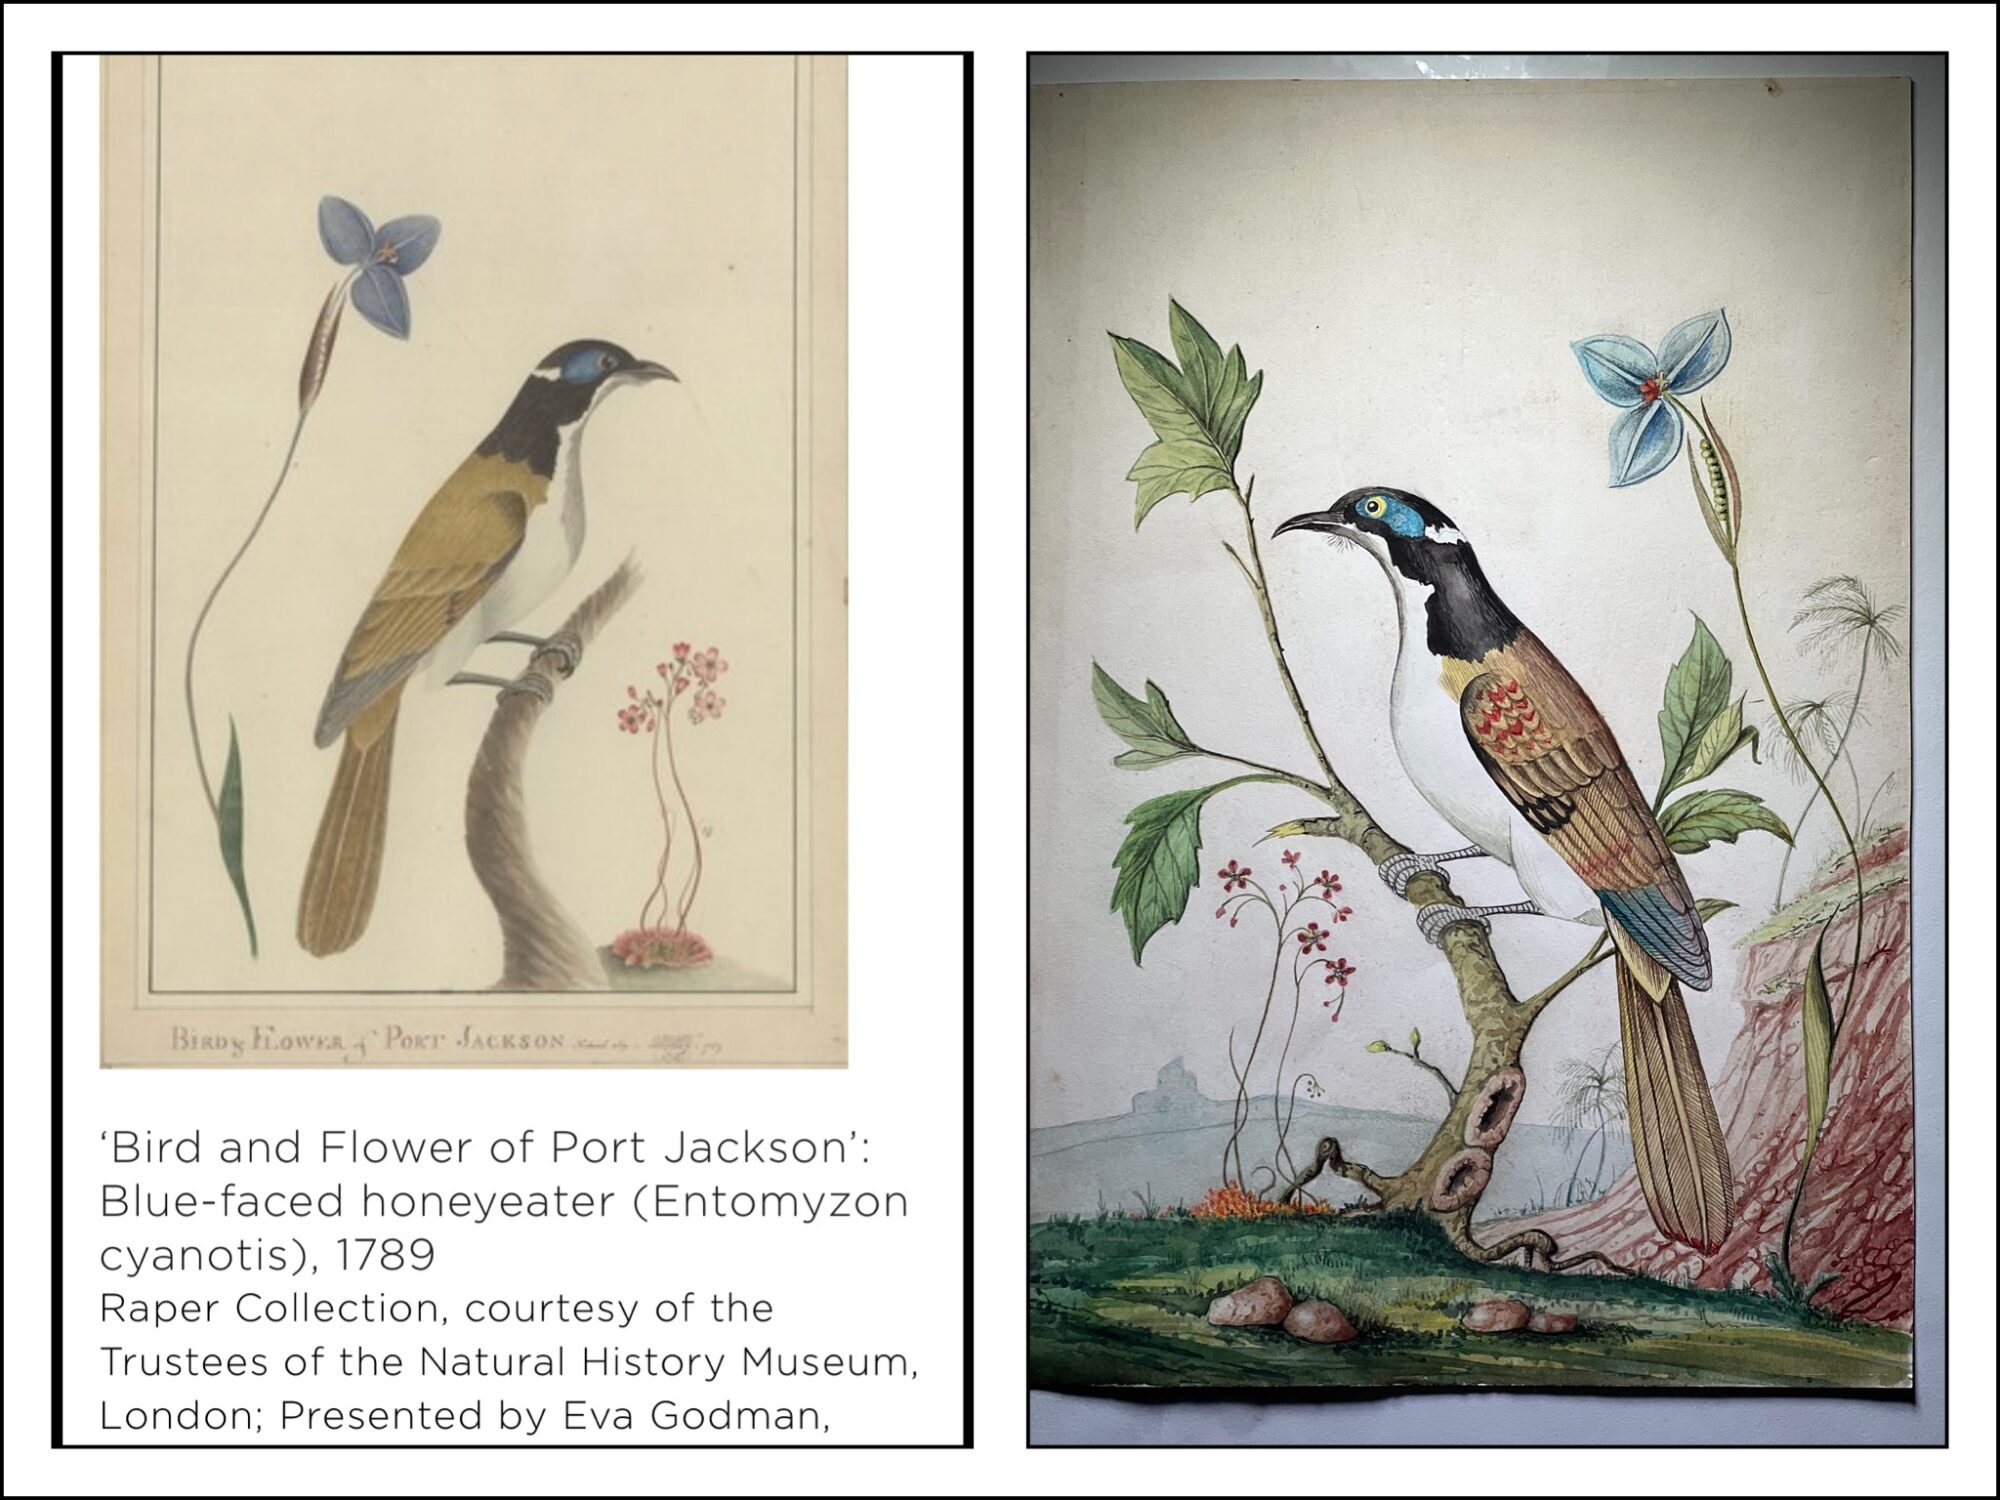 Blue-faced honeyeater, after The Port Jackson Painter, 1789